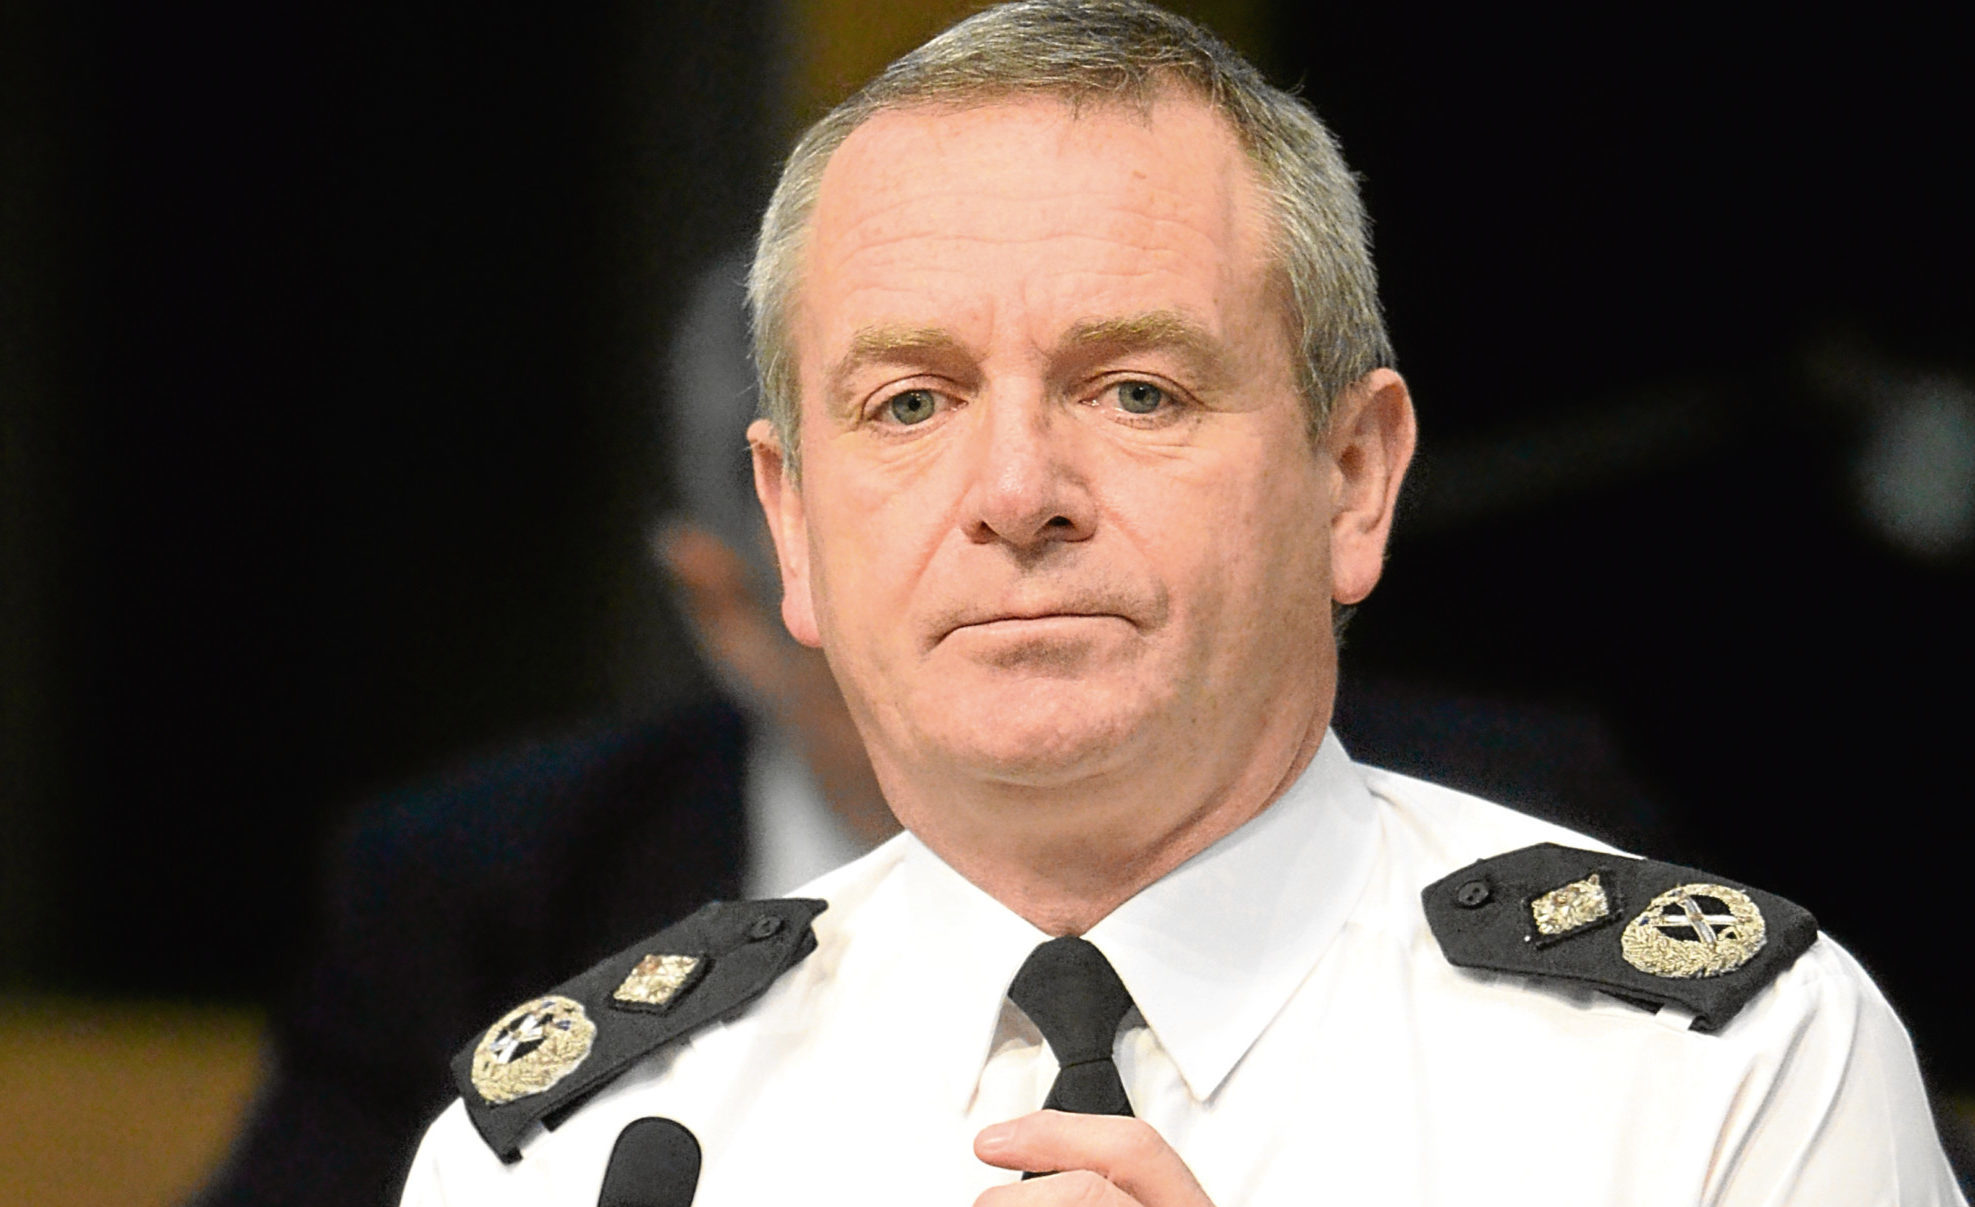 Acting chief constable Iain Livingstone, seen giving evidence to Holyrood’s justice committee last month, faces an SPA probe (Ken Jack - Corbis/Corbis via Getty Images)